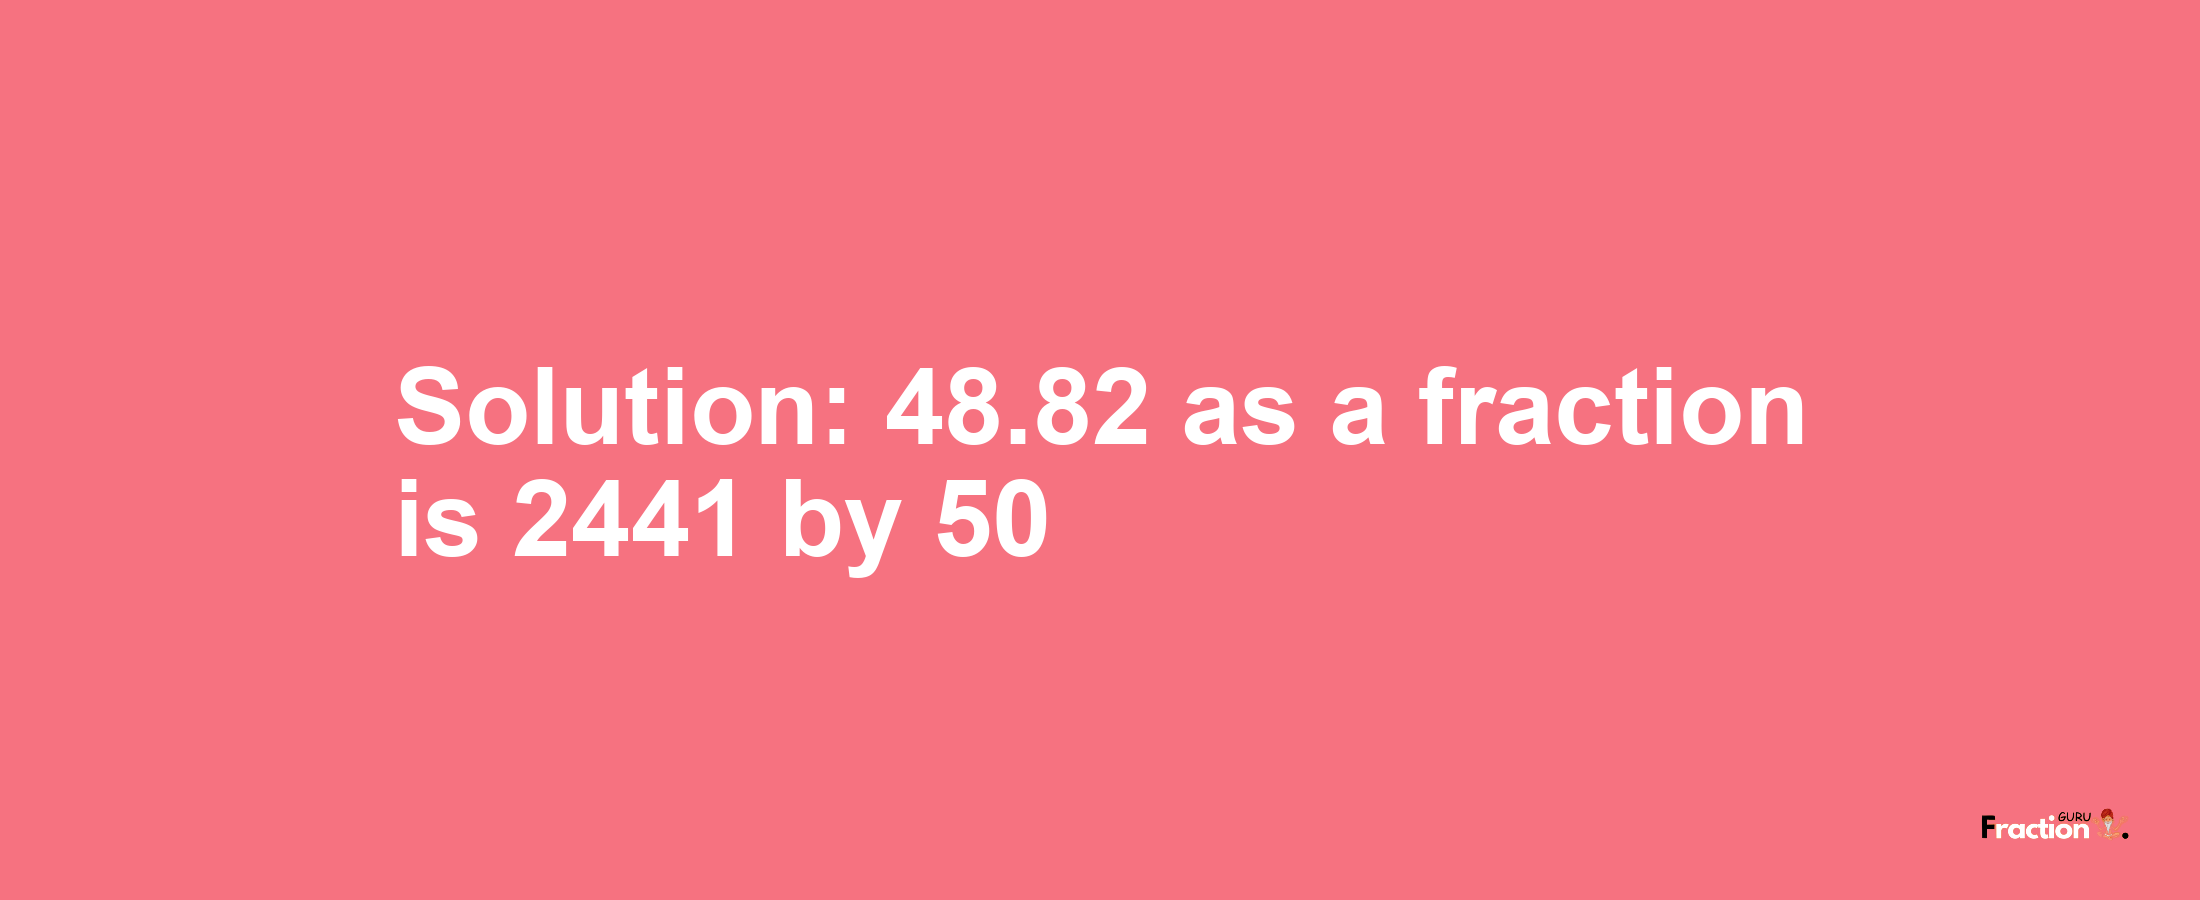 Solution:48.82 as a fraction is 2441/50